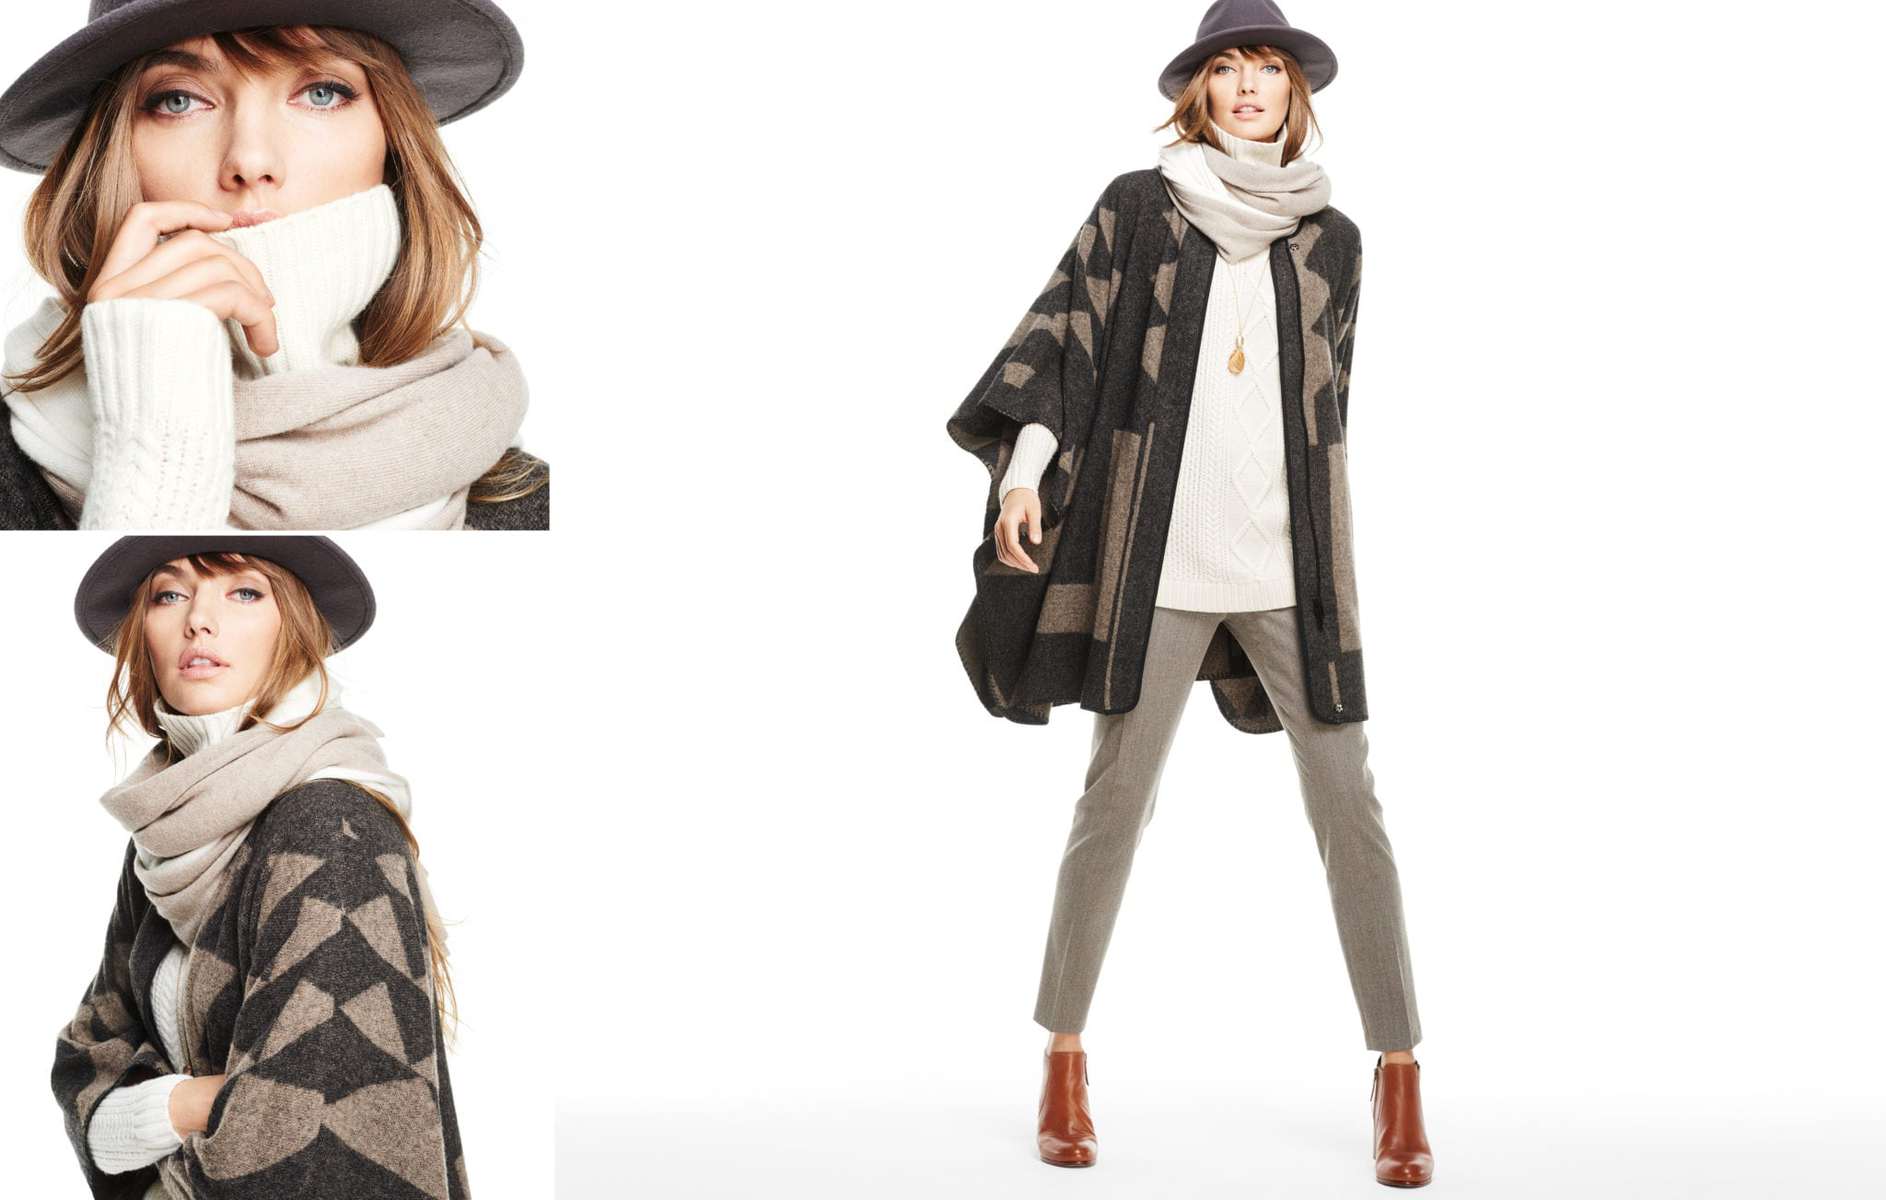 Talbots Fall 2015 Look Book Preview Featuring Ruana